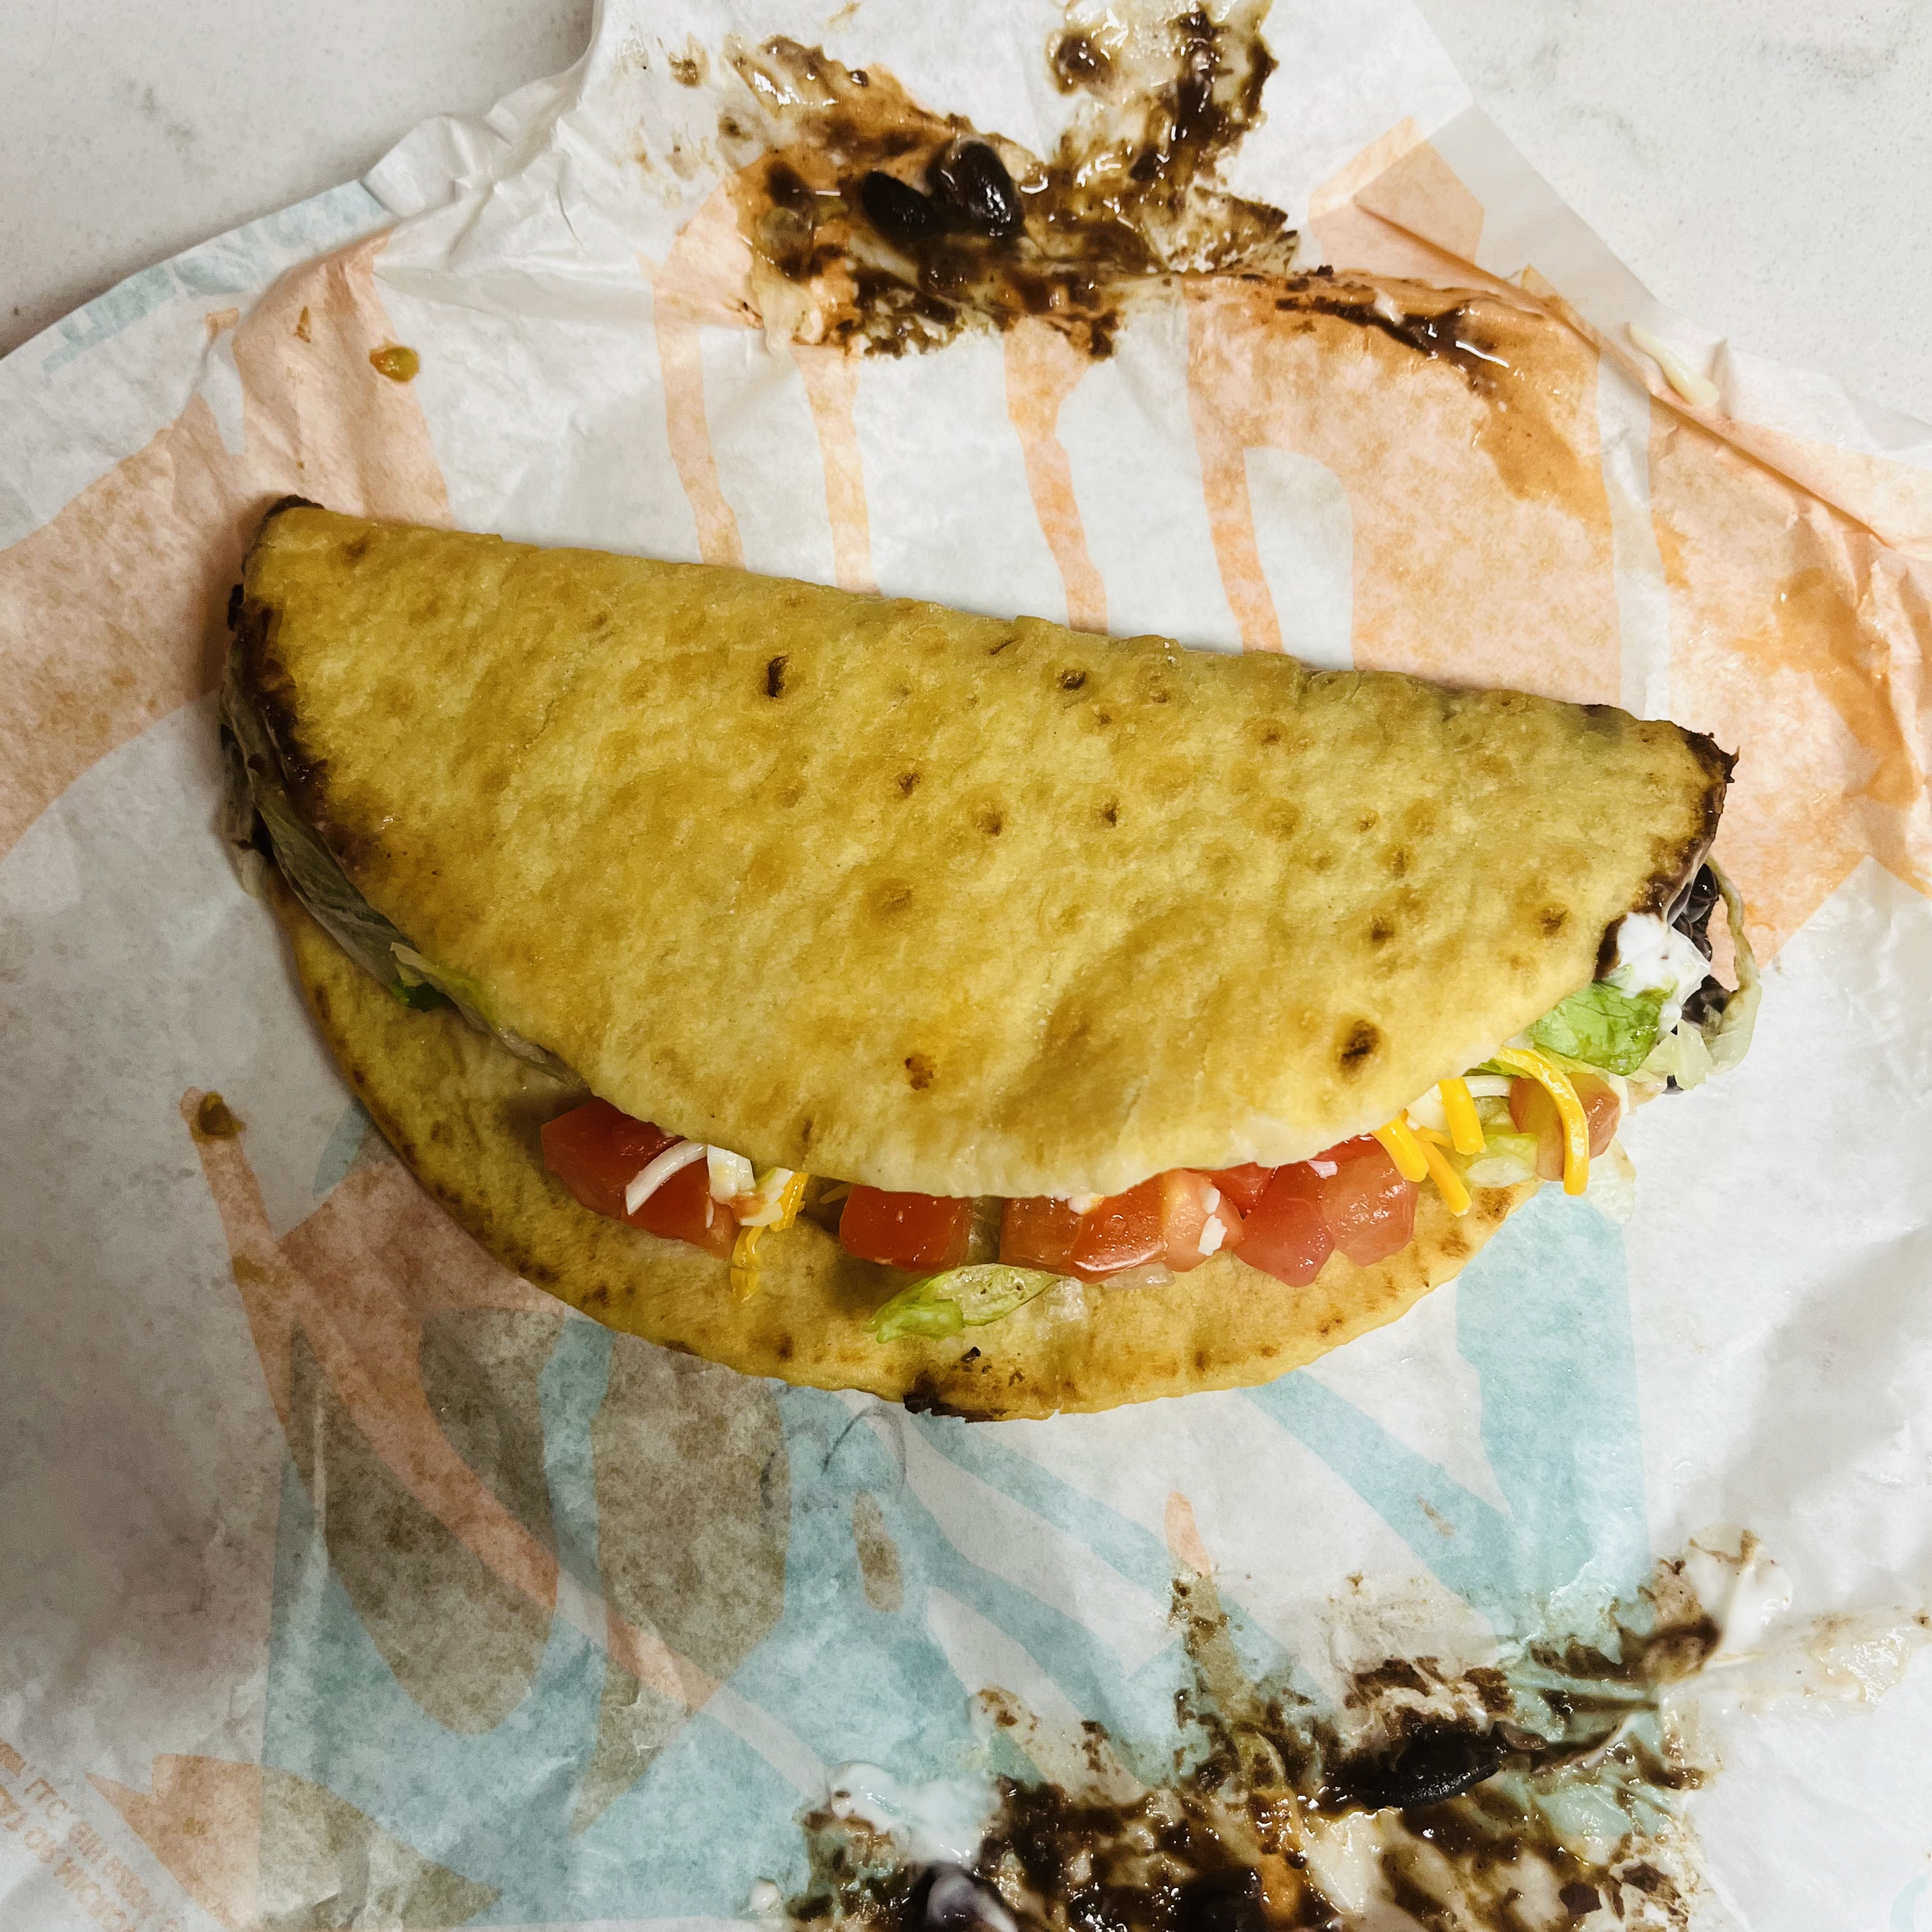 taco Bell ranked